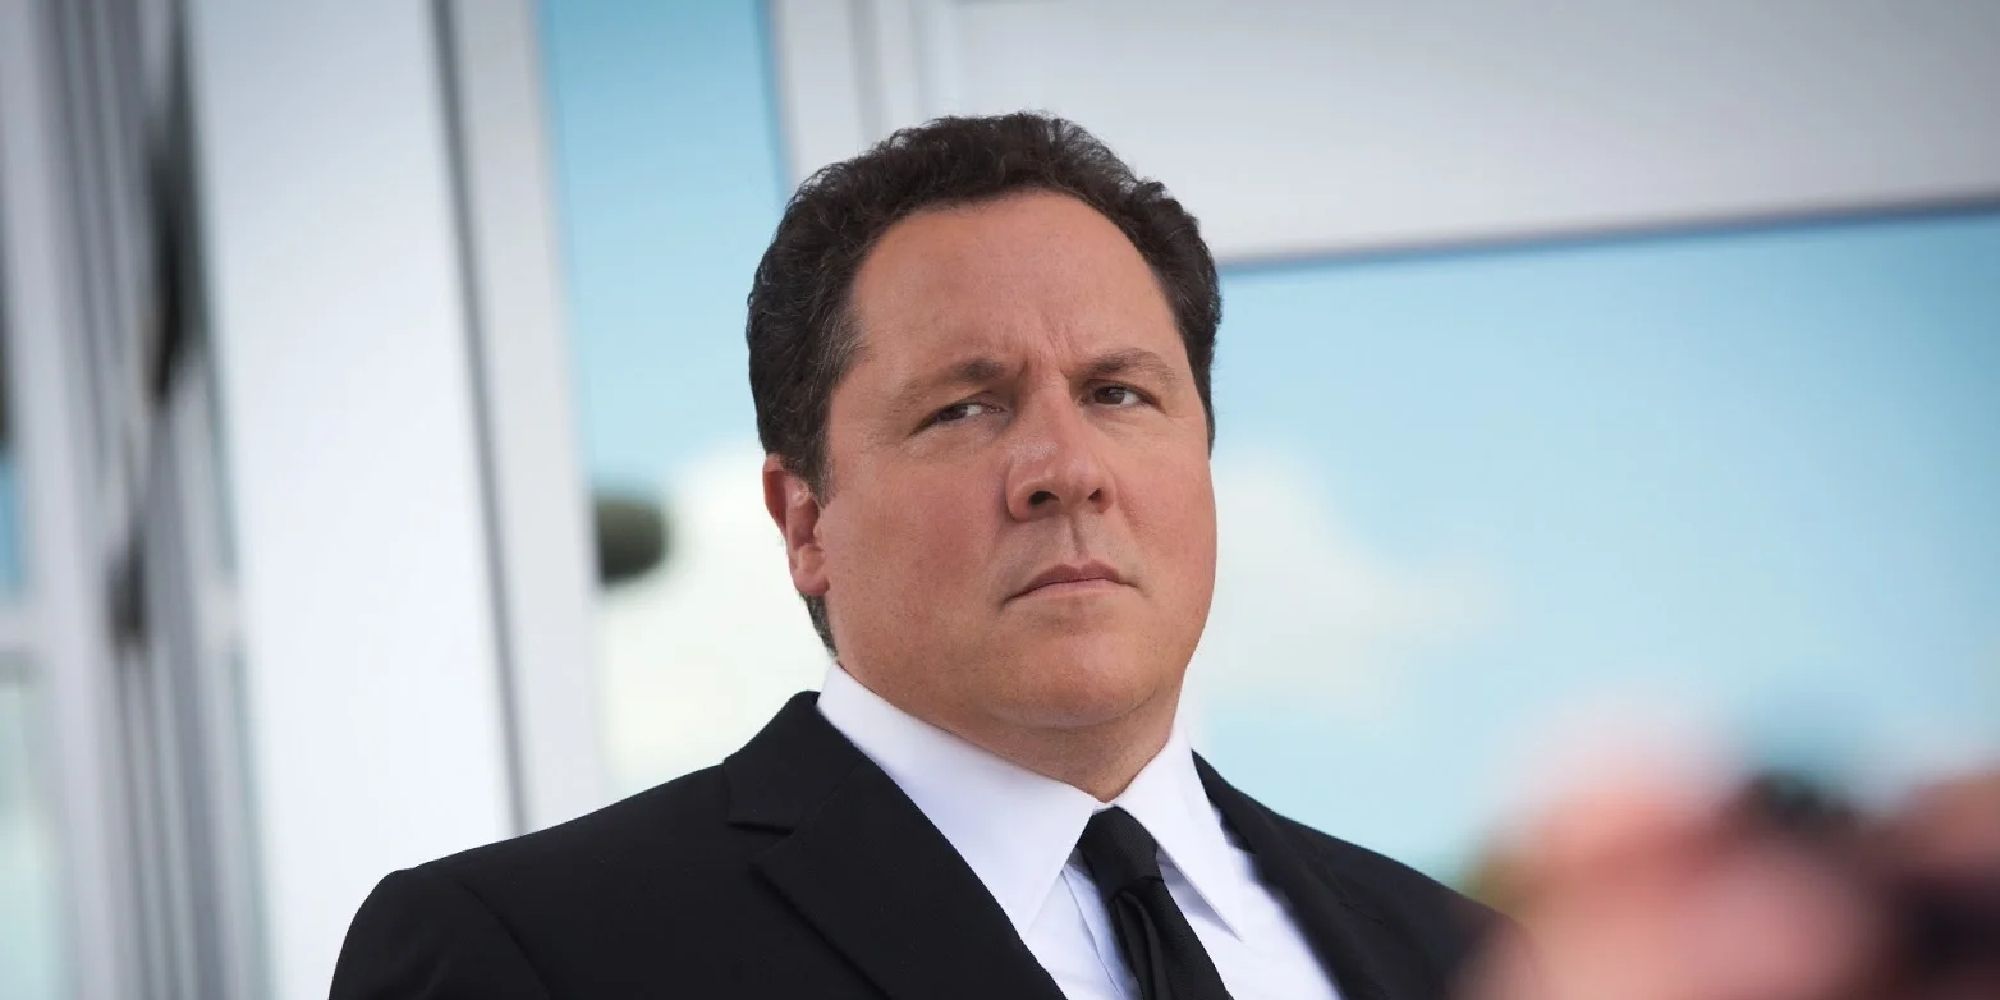 Jon Favreau with a worried expression in 'Iron Man 3'